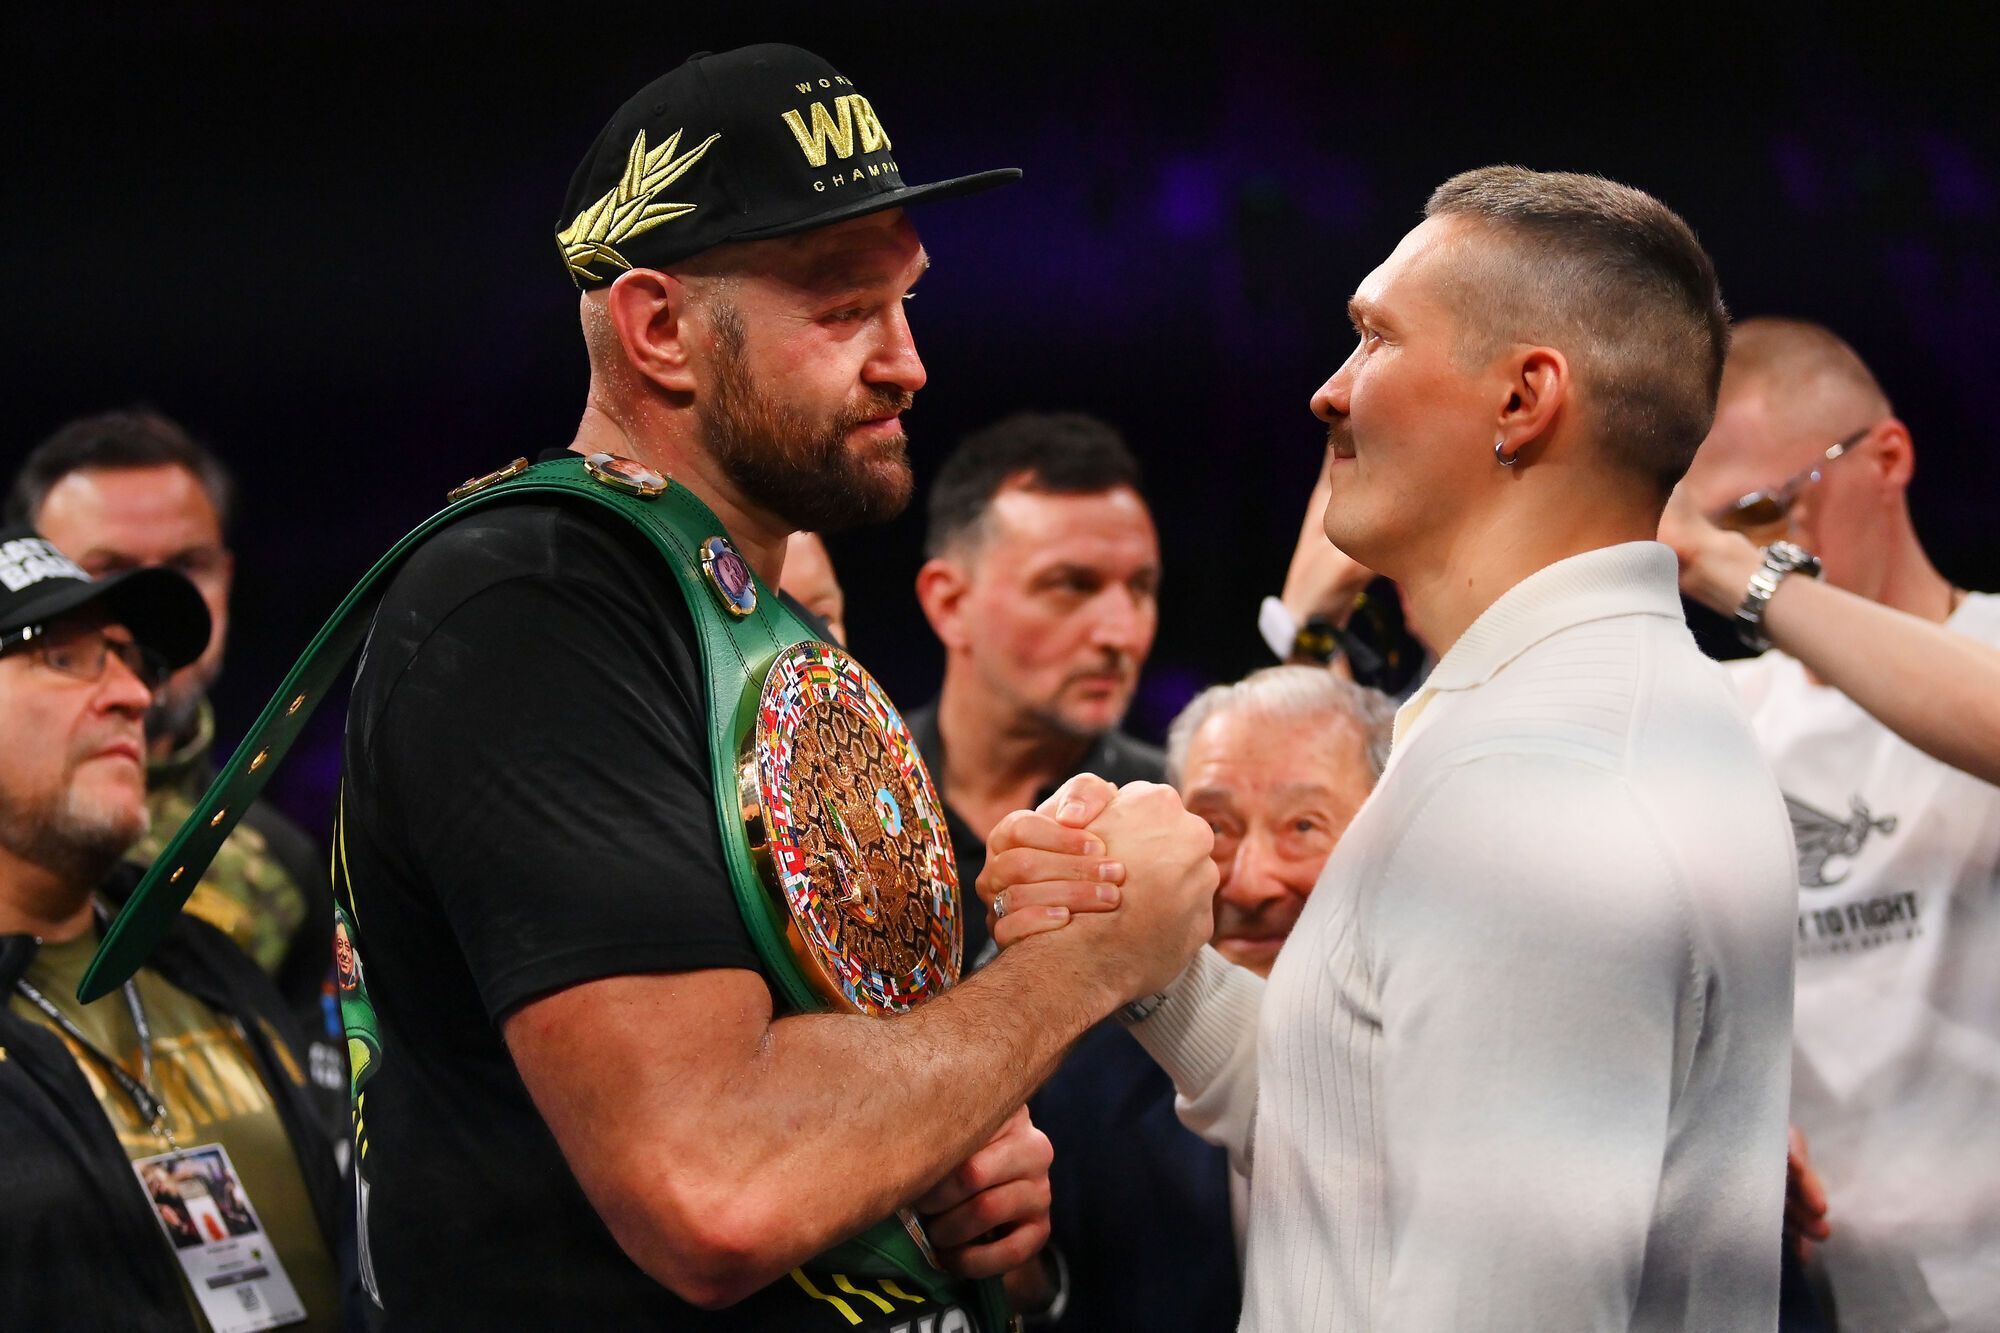 'It could finish you off'. Tyson Fury's friend gave him unexpected advice on what to do before the fight with Usik